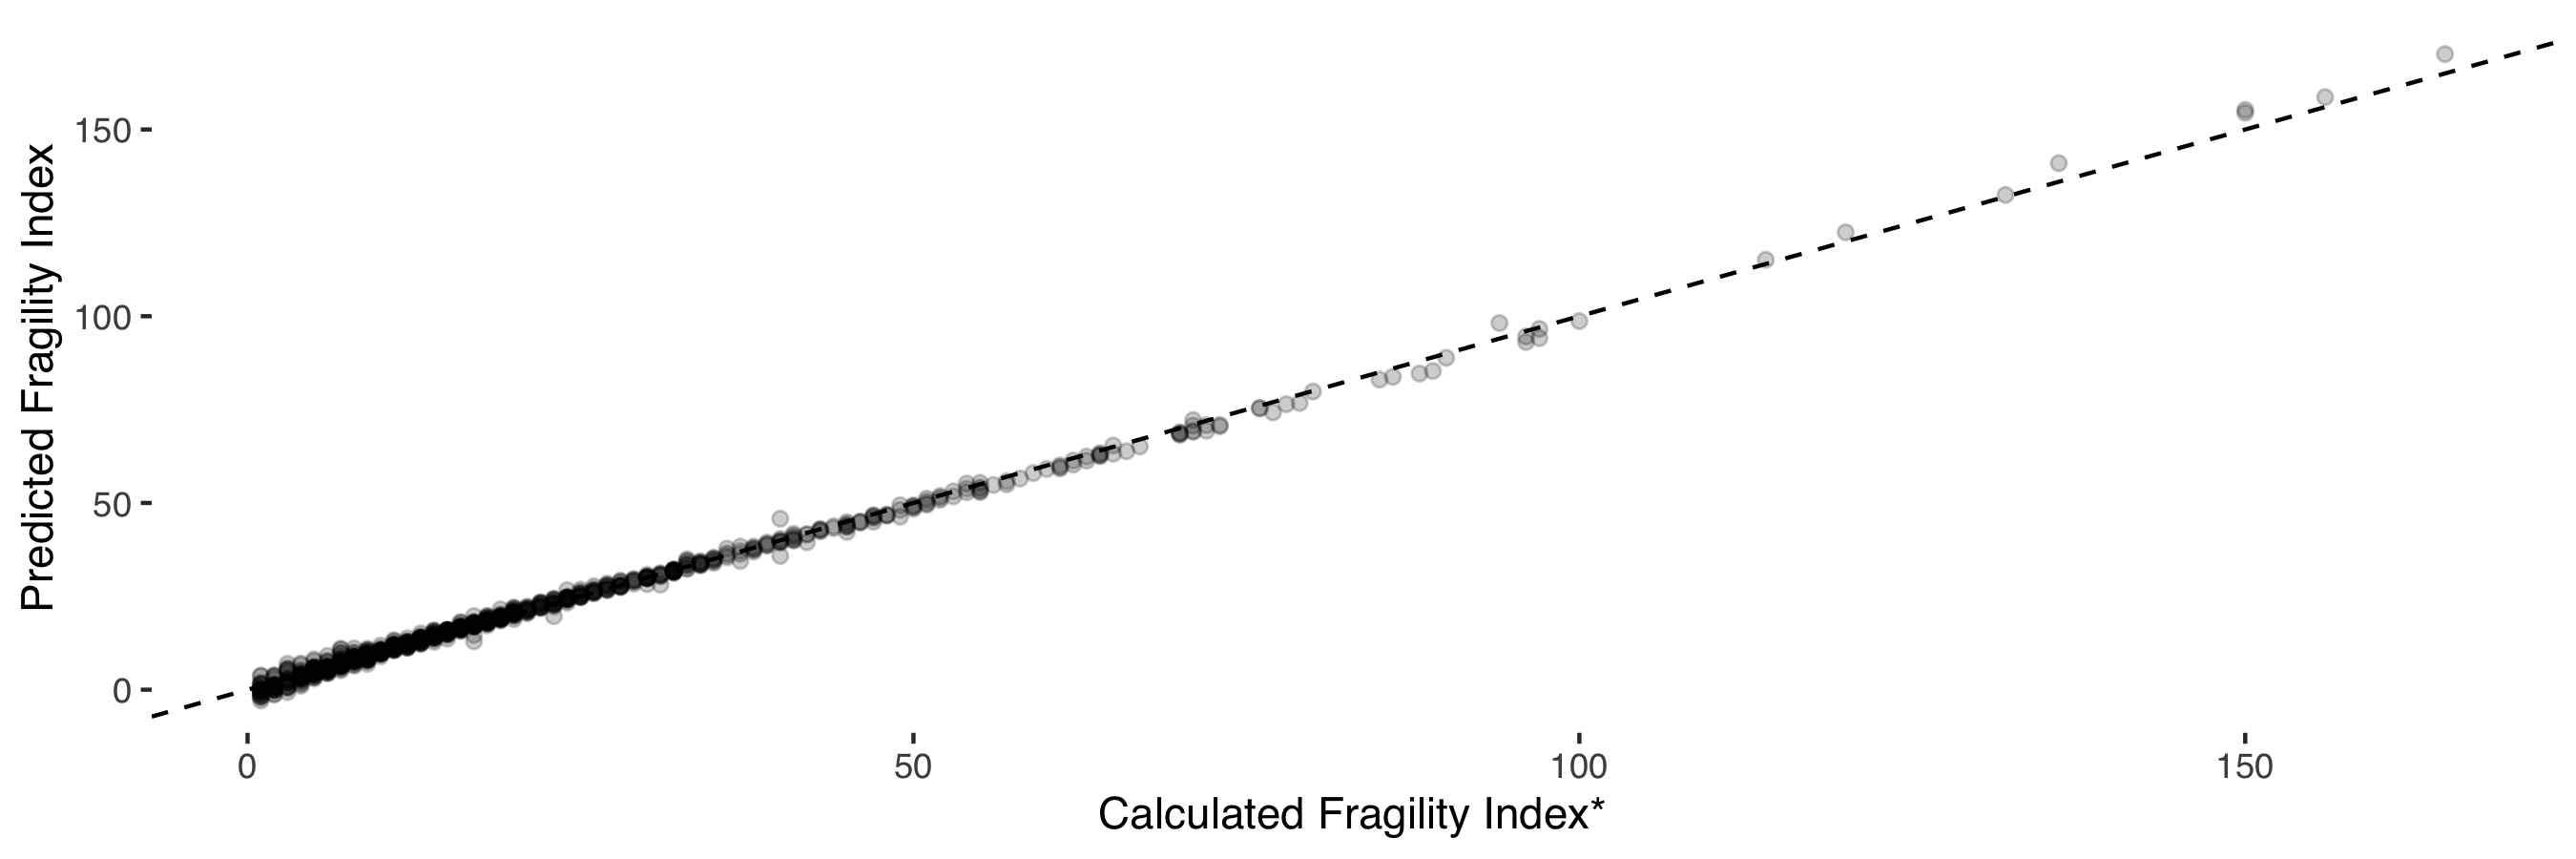 *Relationship between predicted fragility index and calculated fragility index. The predicted fragililty is a function of the log transformed p value, number of study participants, observed treatment effect and control group mortality.*